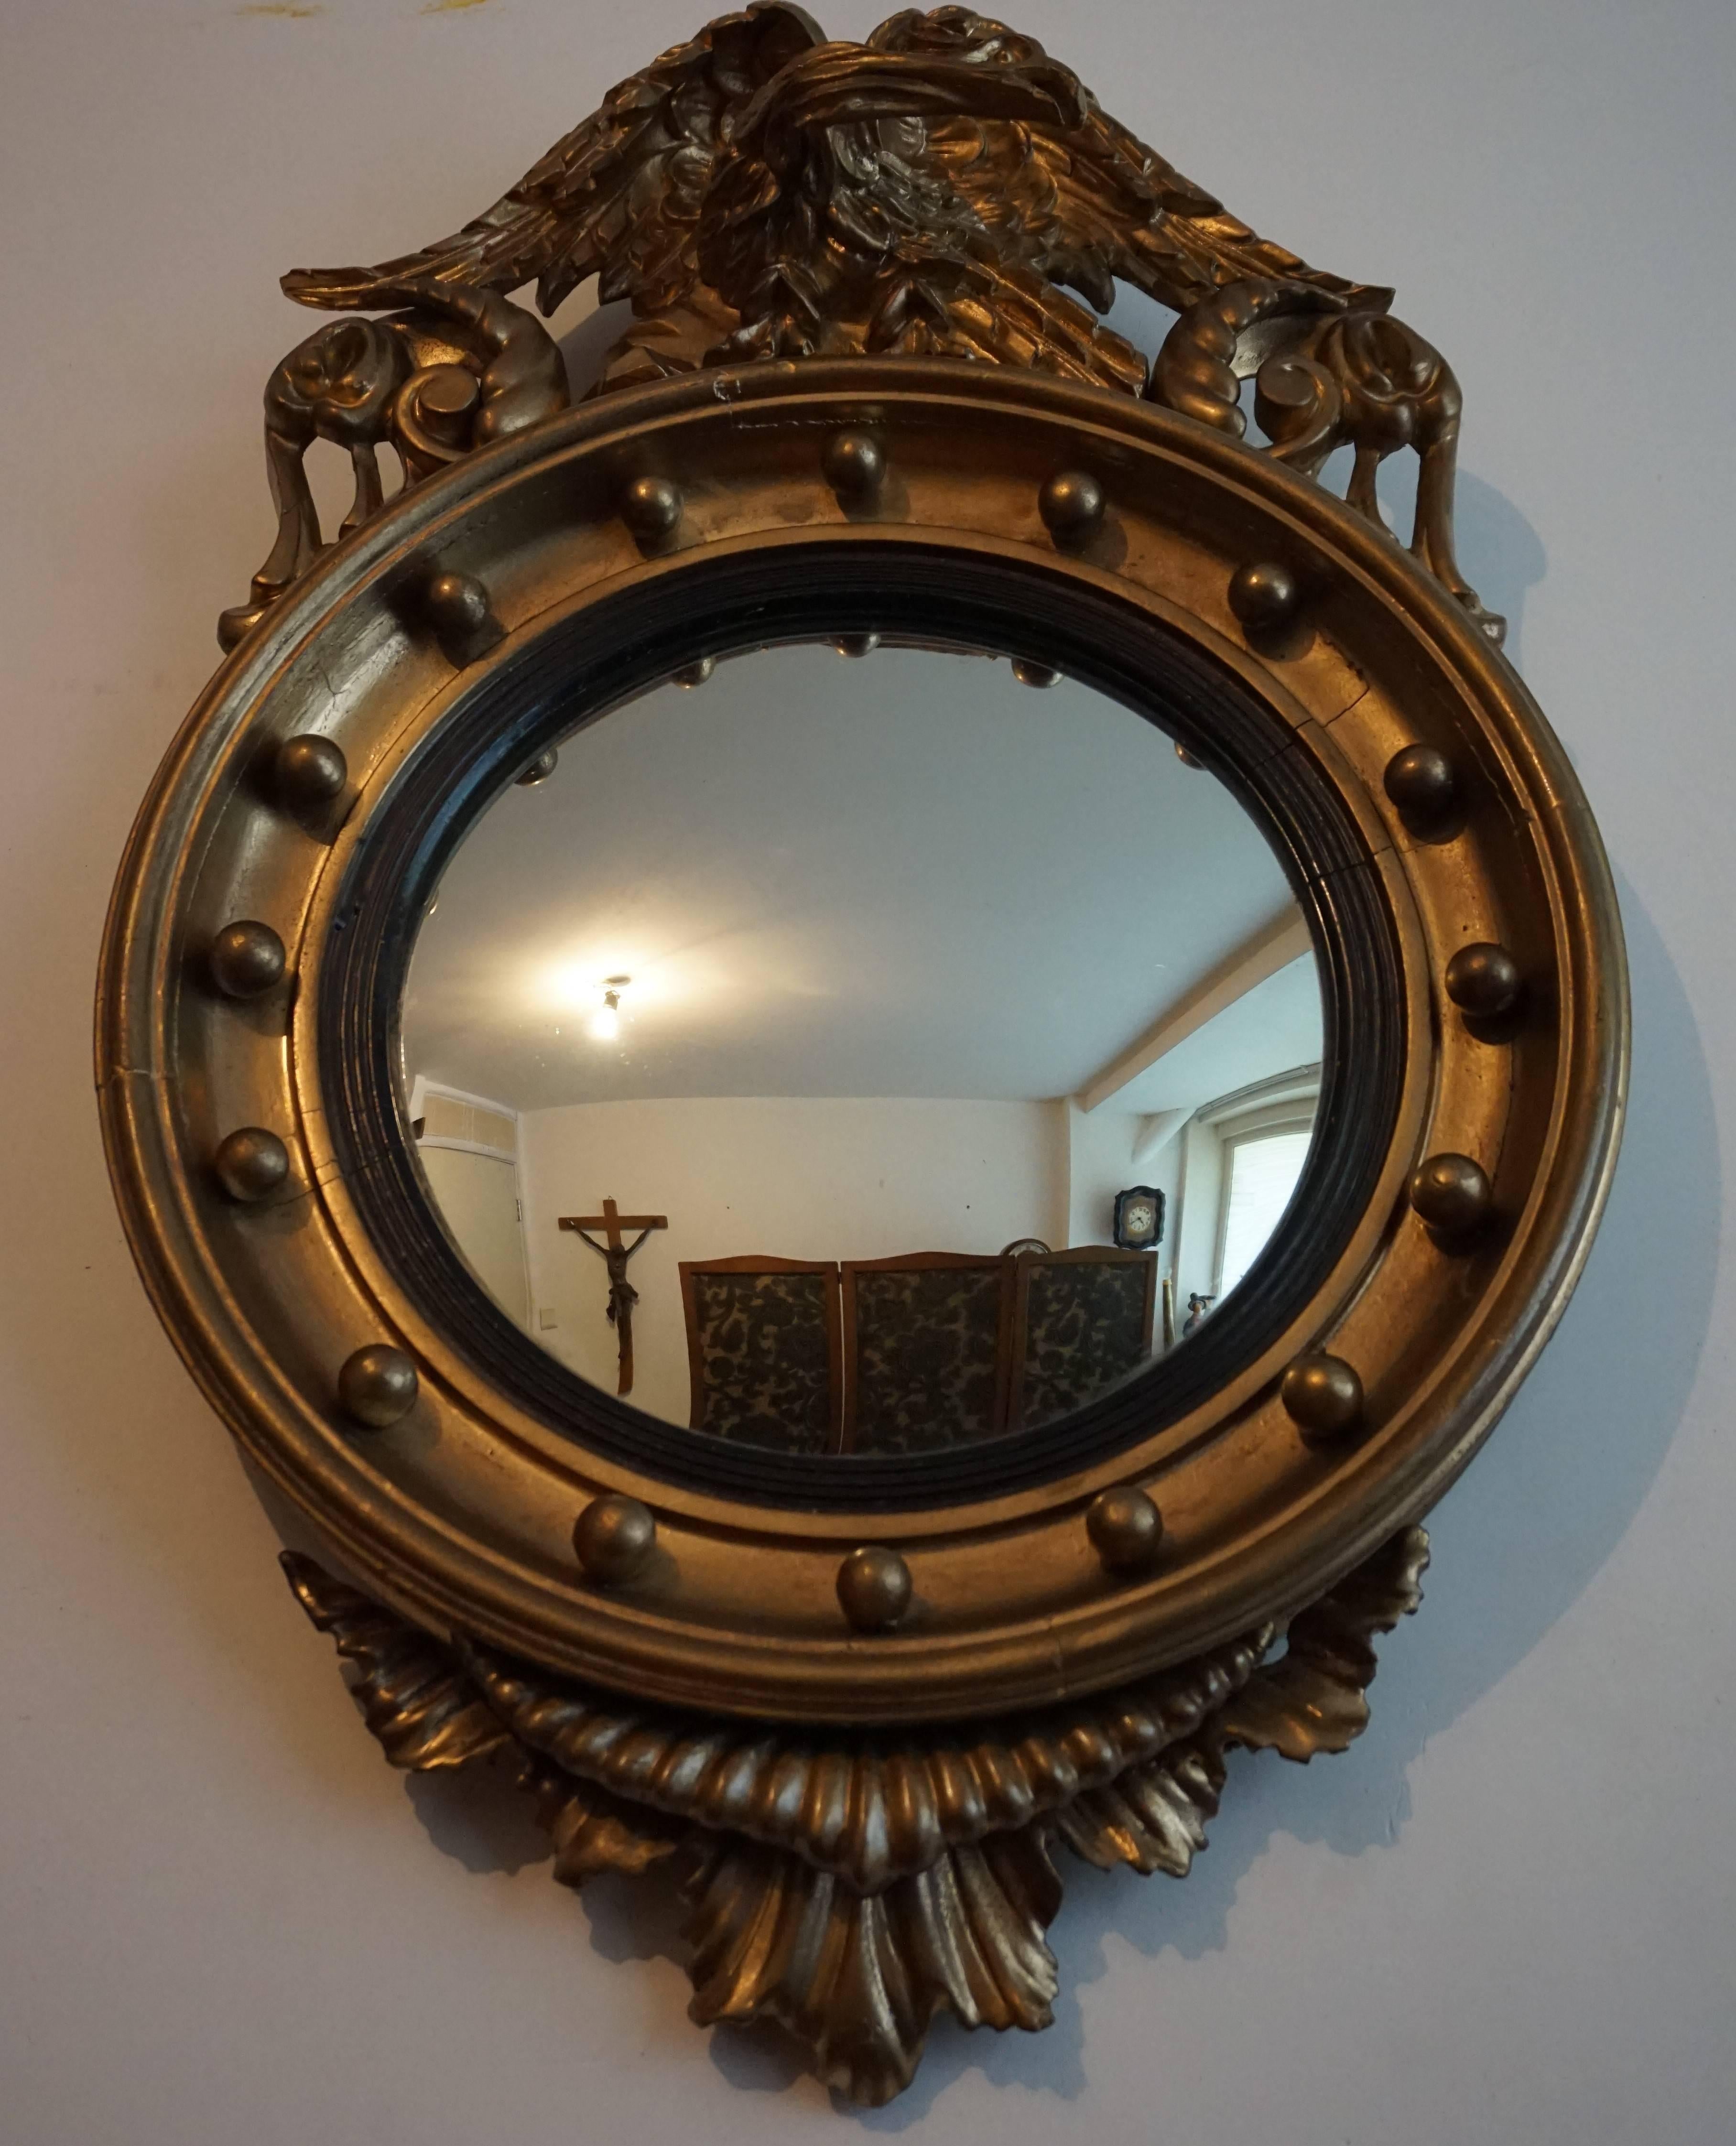 Hand-Carved 19th Century Gilt Federal Style Convex Mirror or Butler Mirror with Carved Eagle